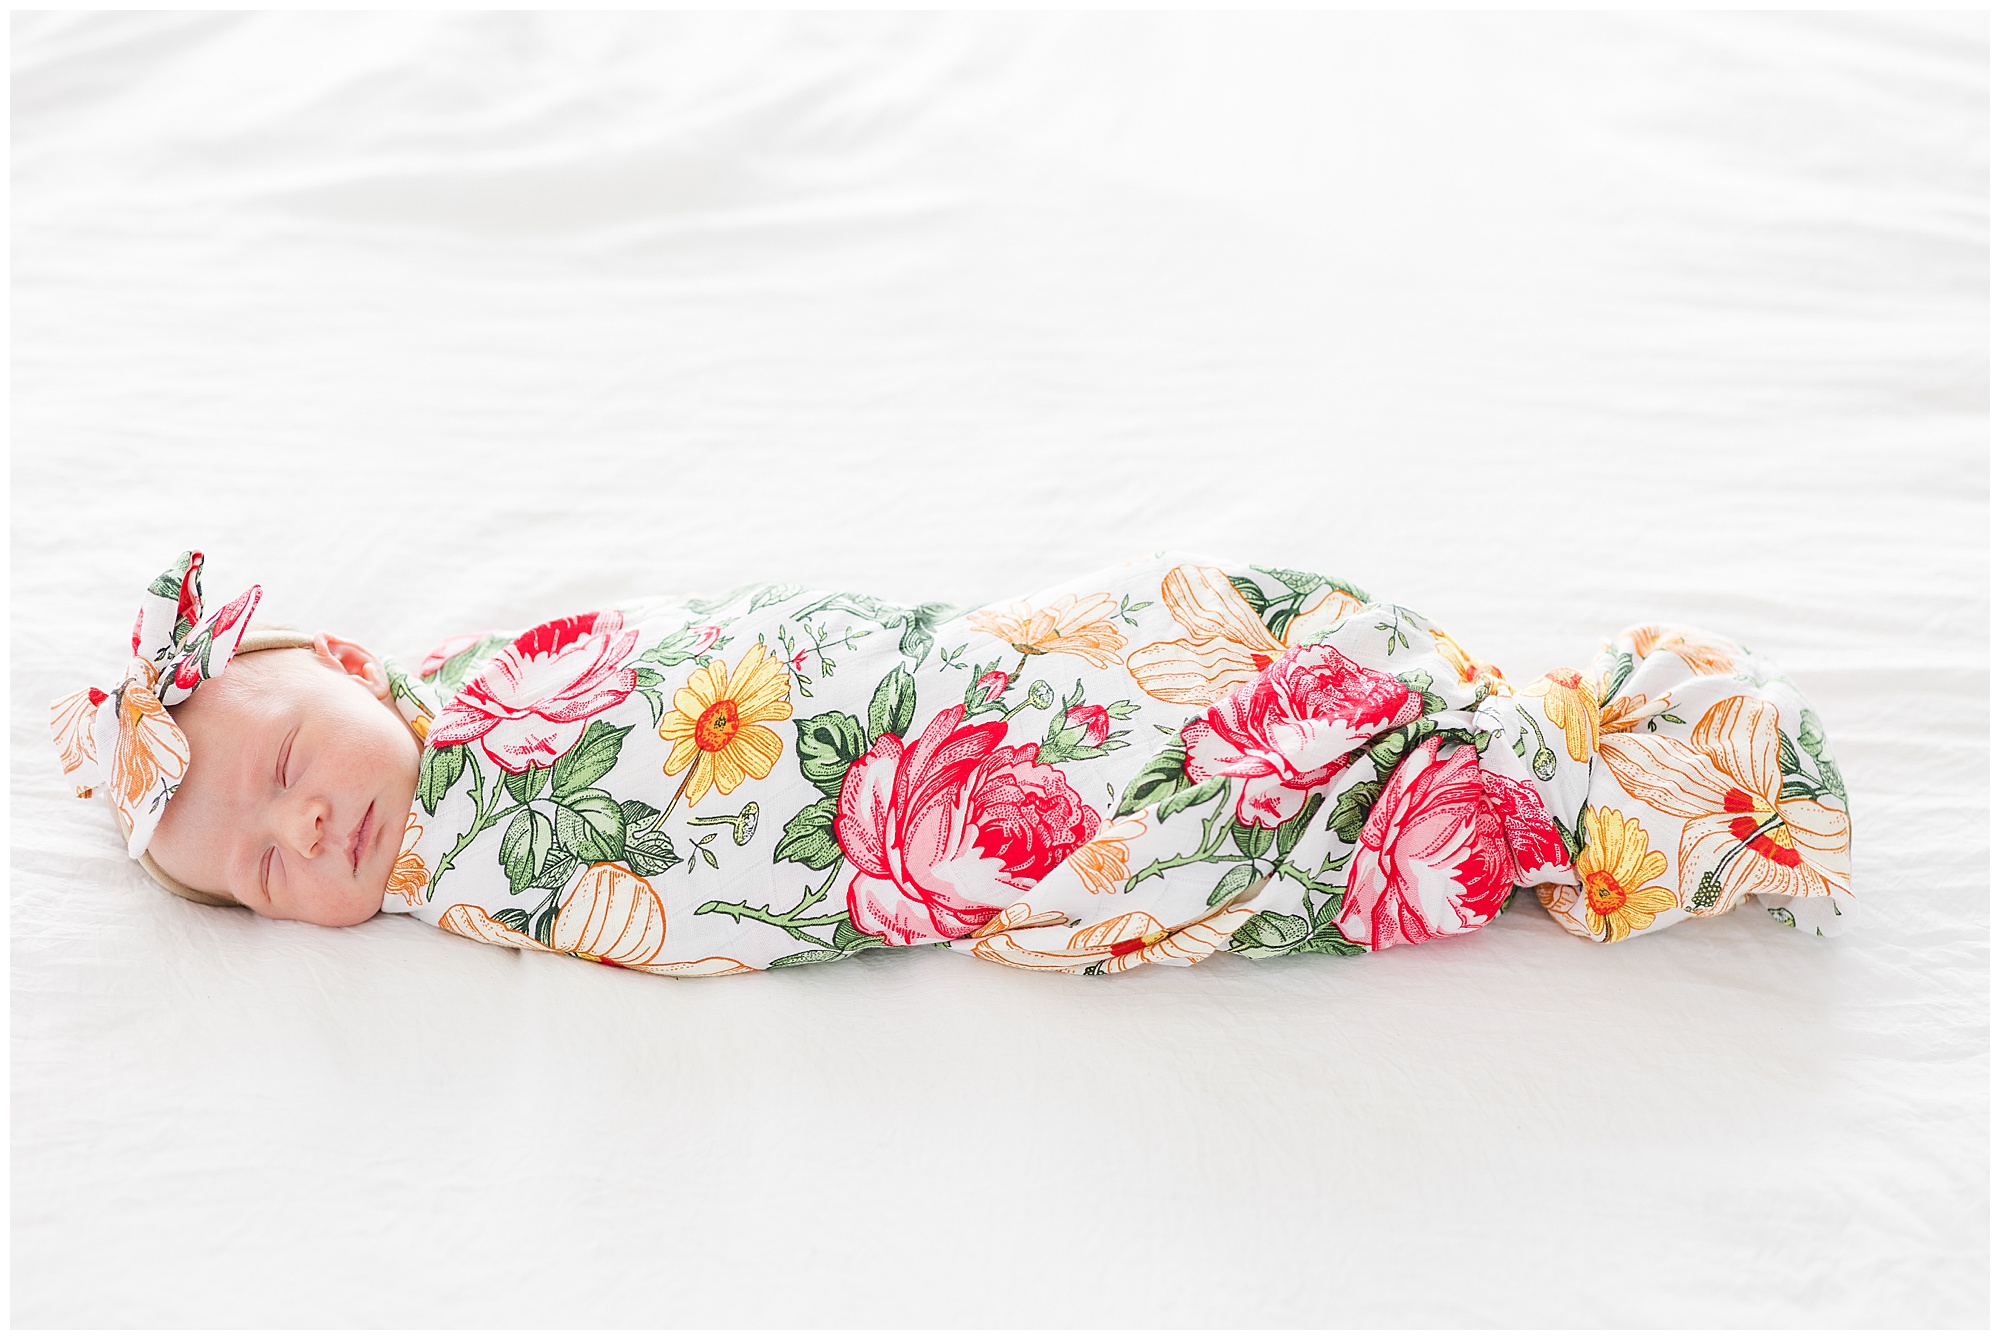 Newborn infant in colorful floral swaddle and bow sleeps on white sheets during lifestyle newborn family session. 